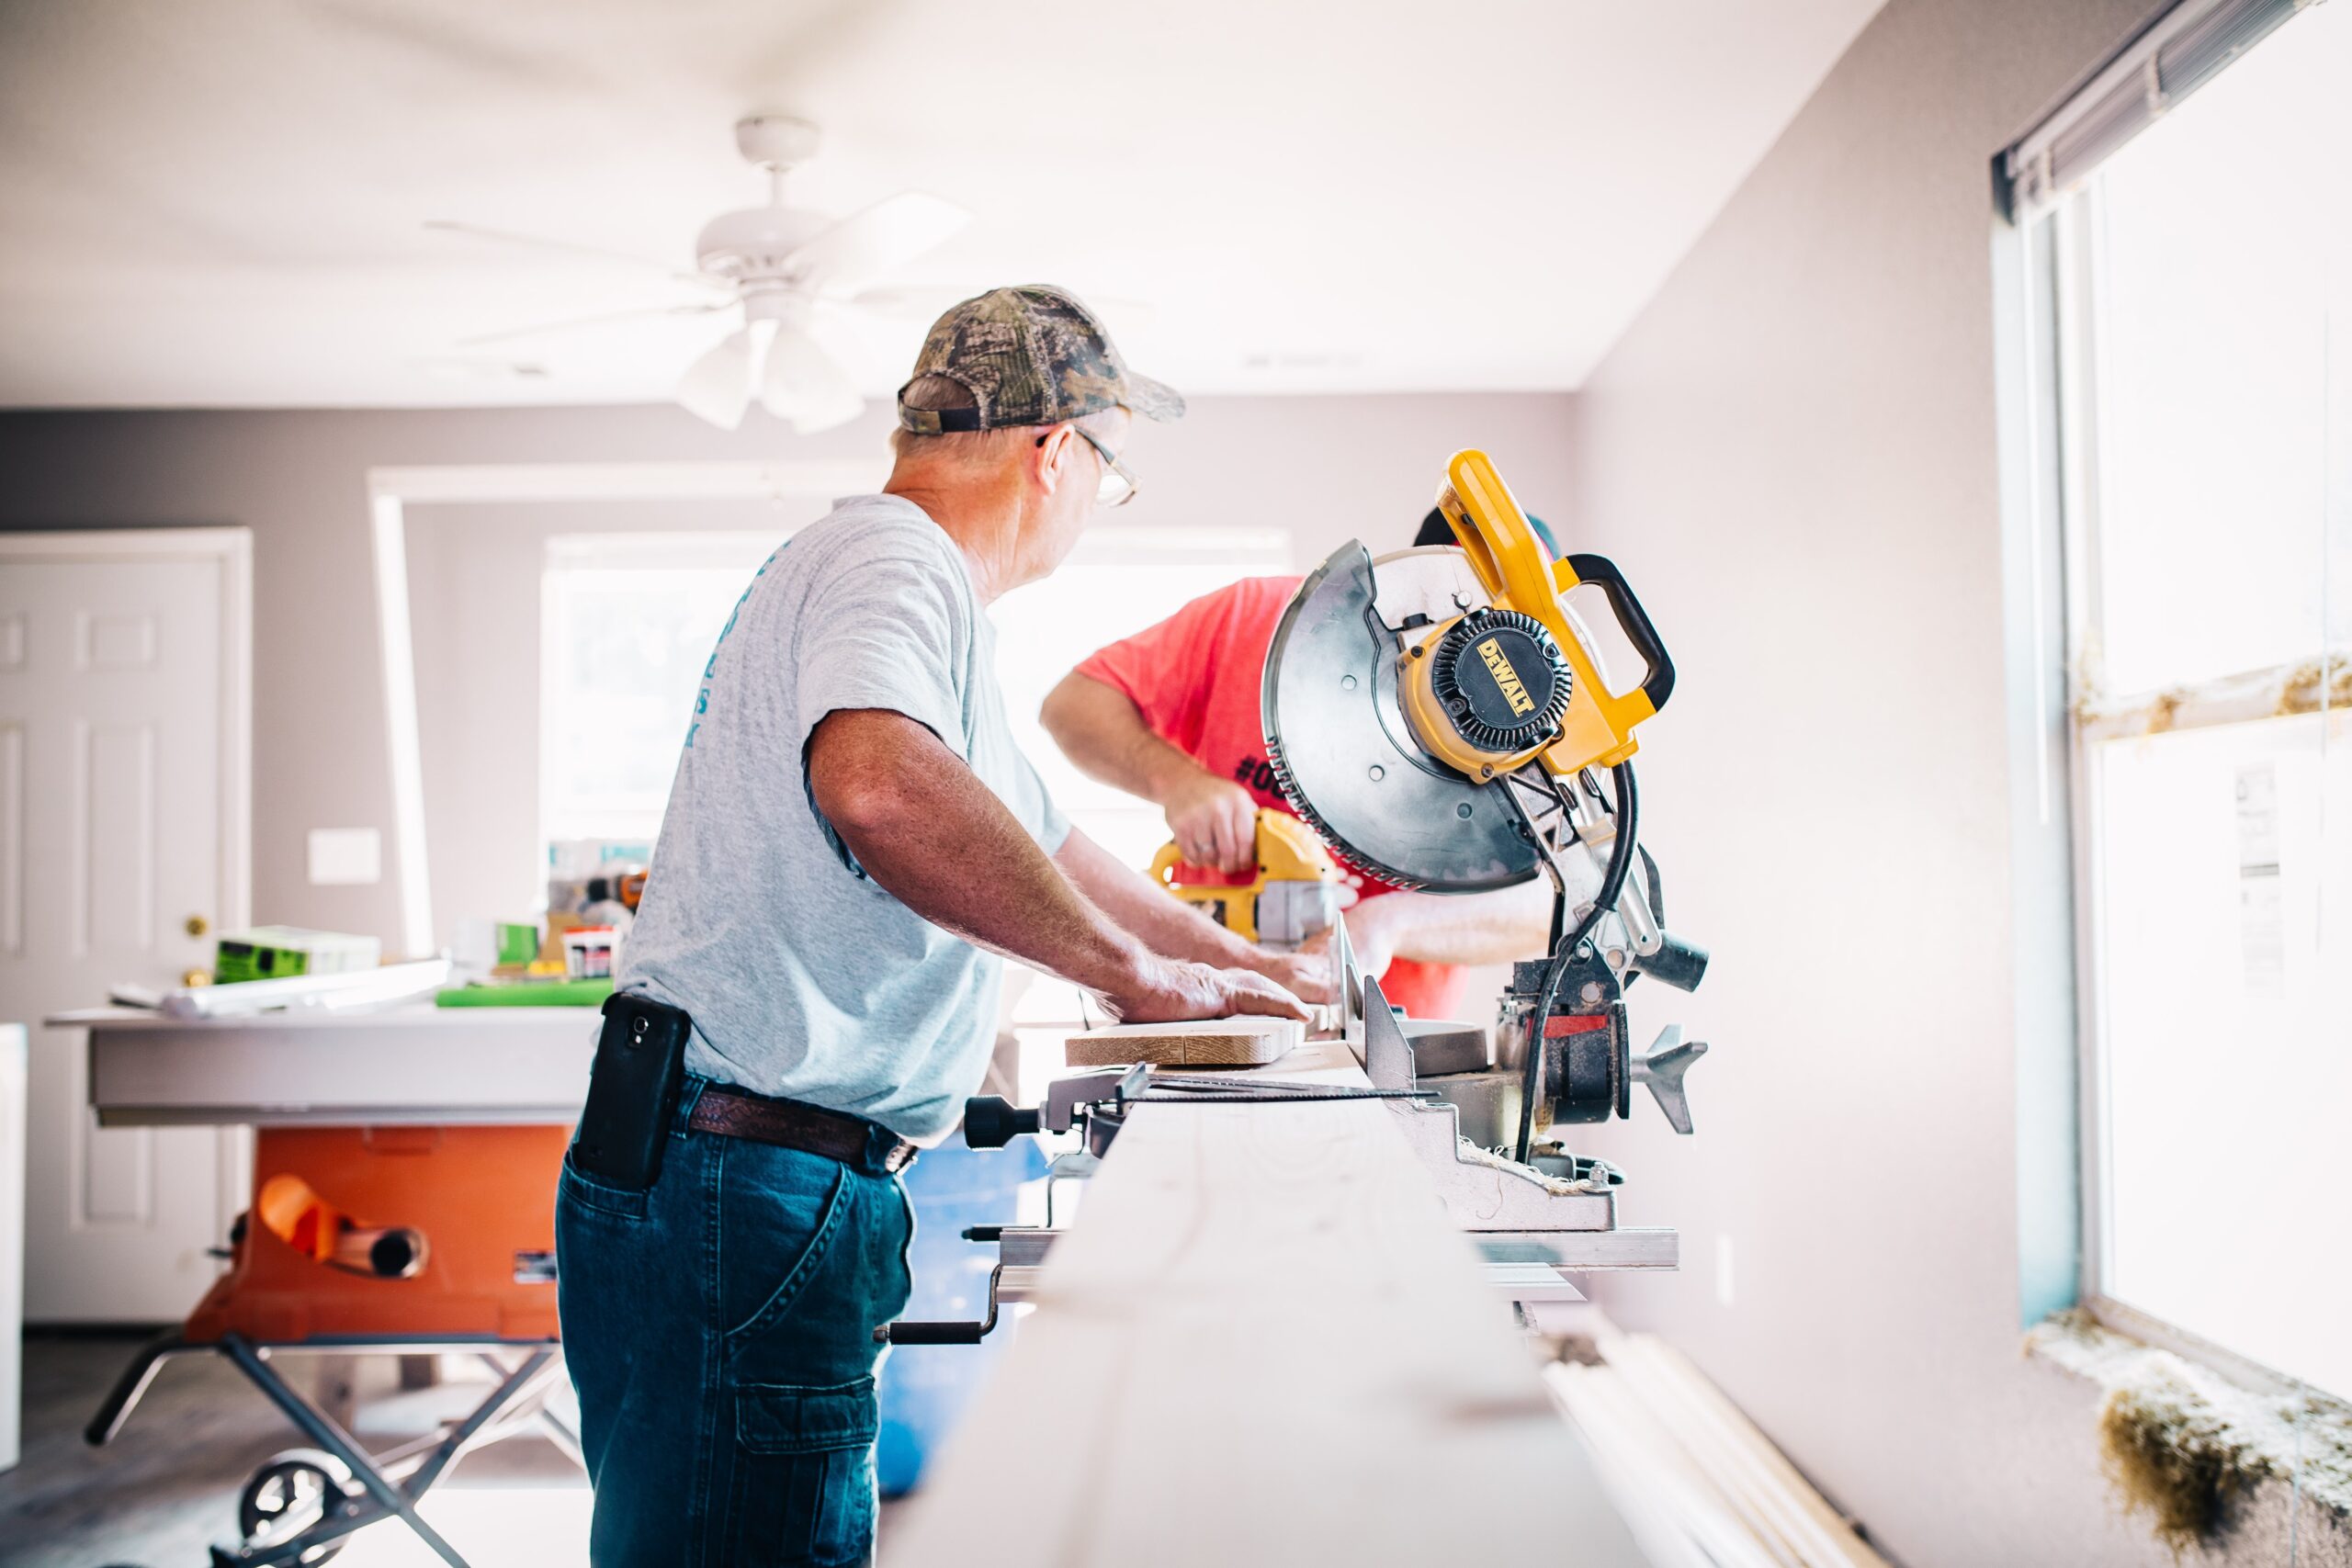 5 Things To Keep In Mind About Home Improvement Loans